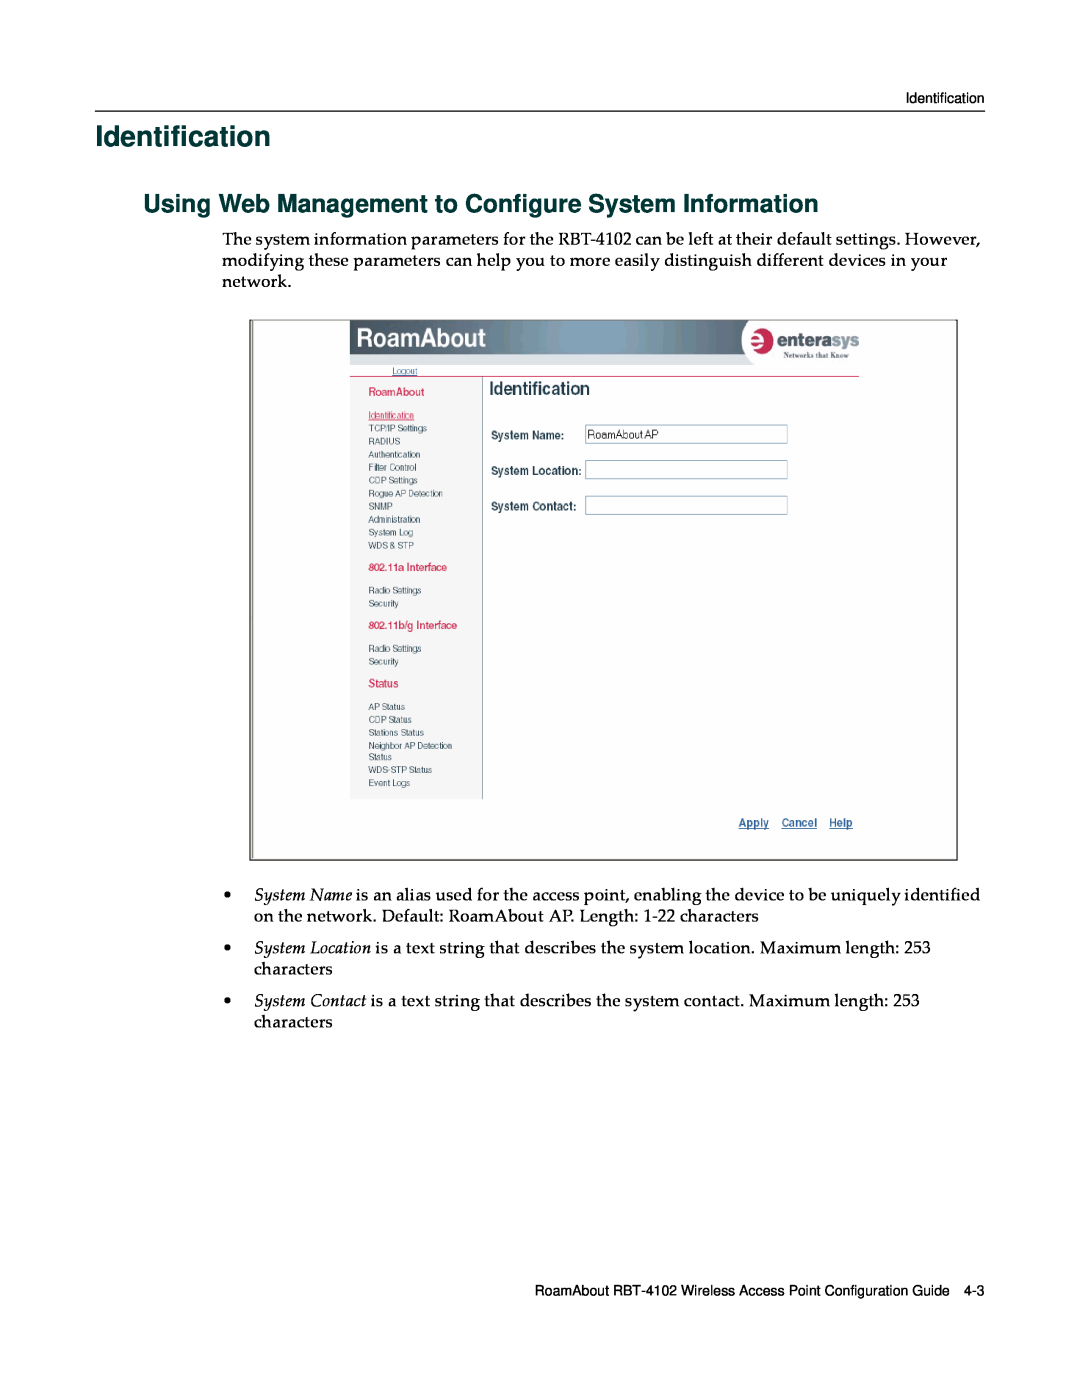 Enterasys Networks RBT-4102 manual Identification, Using Web Management to Configure System Information 